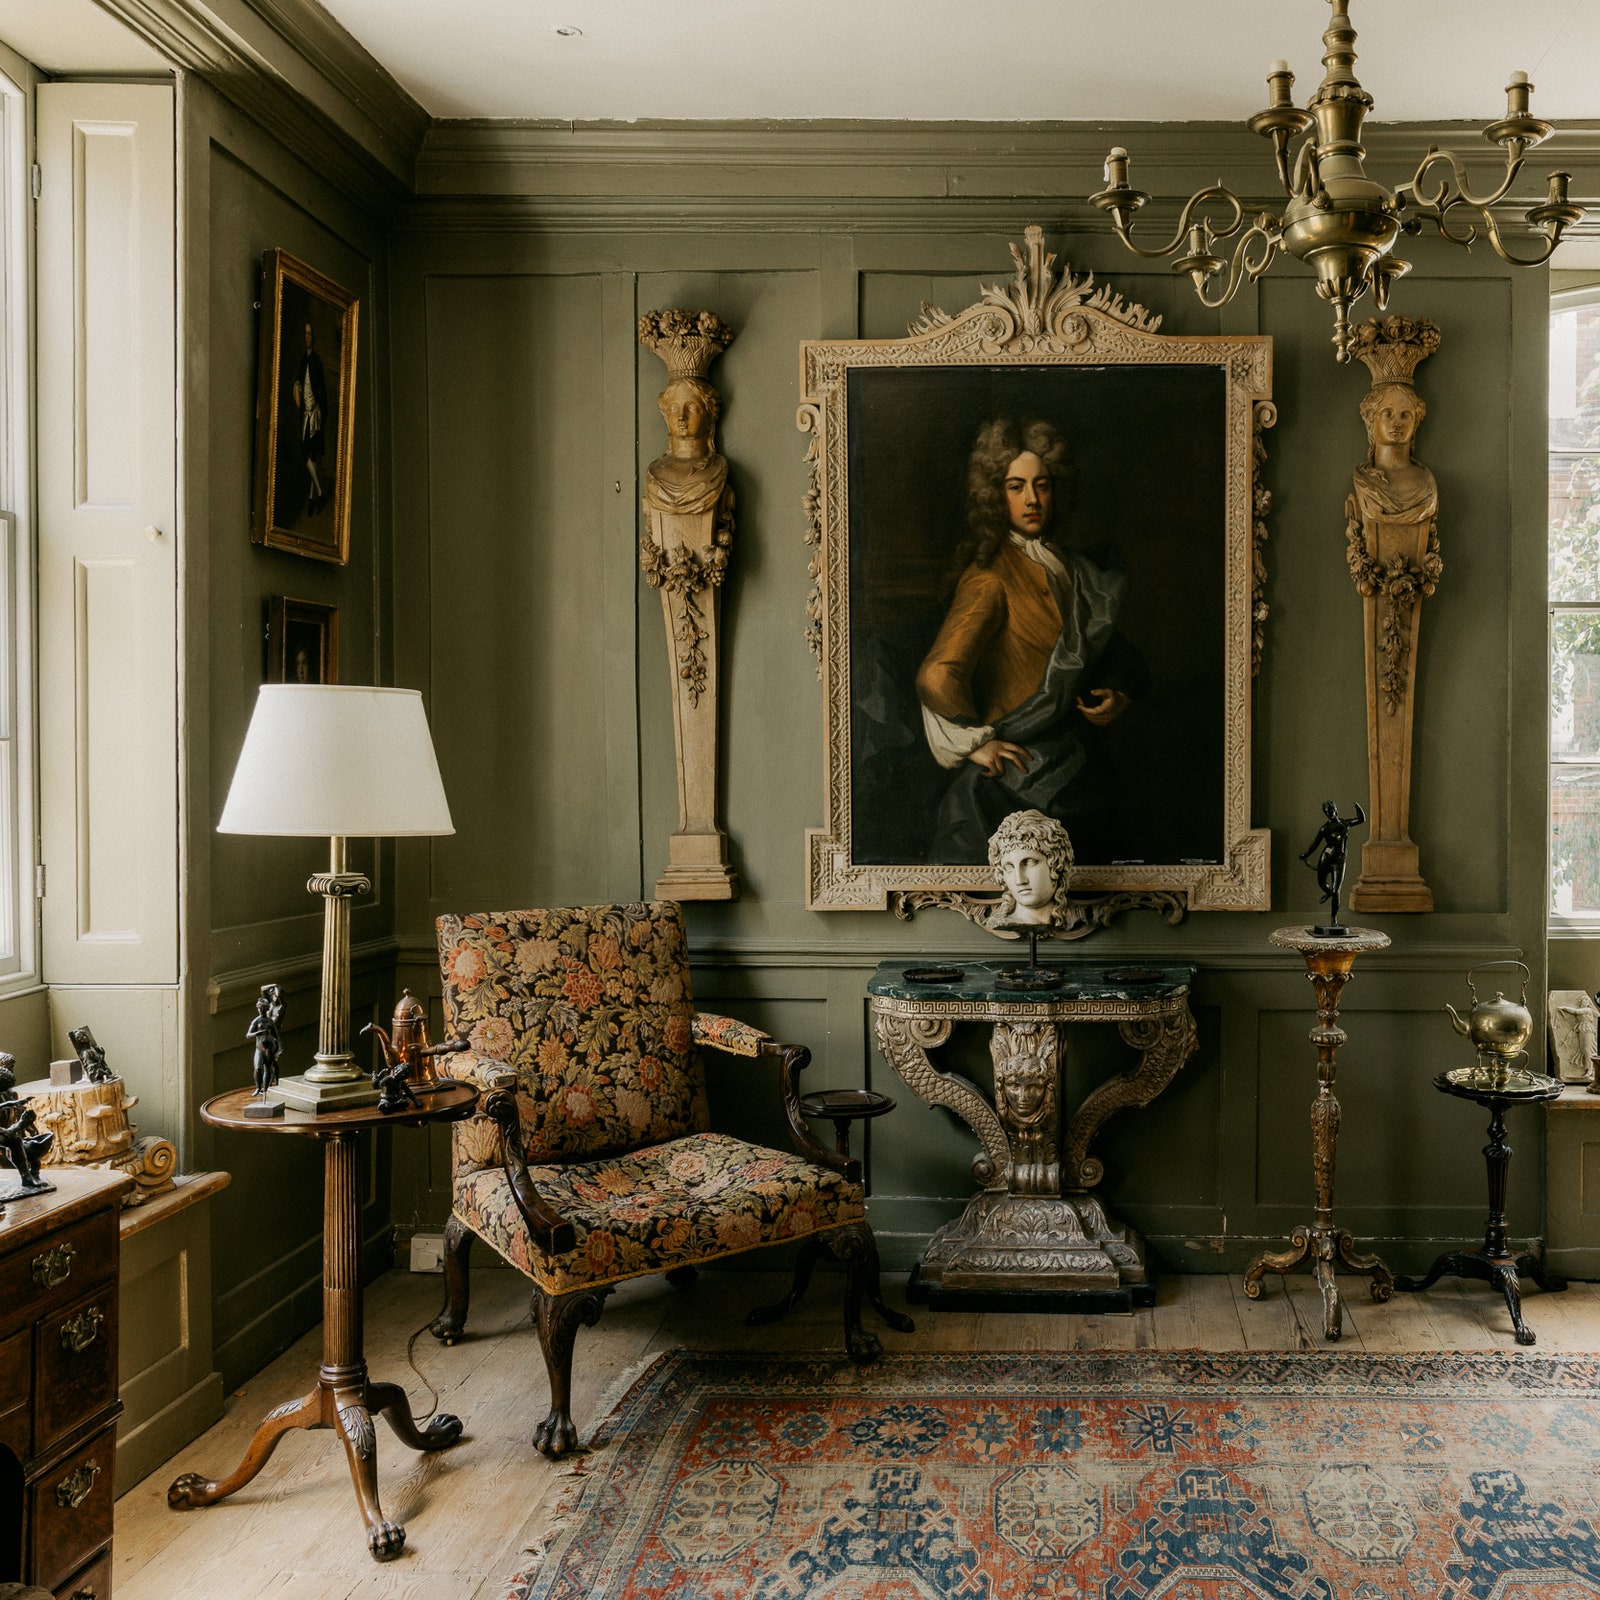 An 18th-century Spitalfields townhouse meticulously furnished and restored to period glory